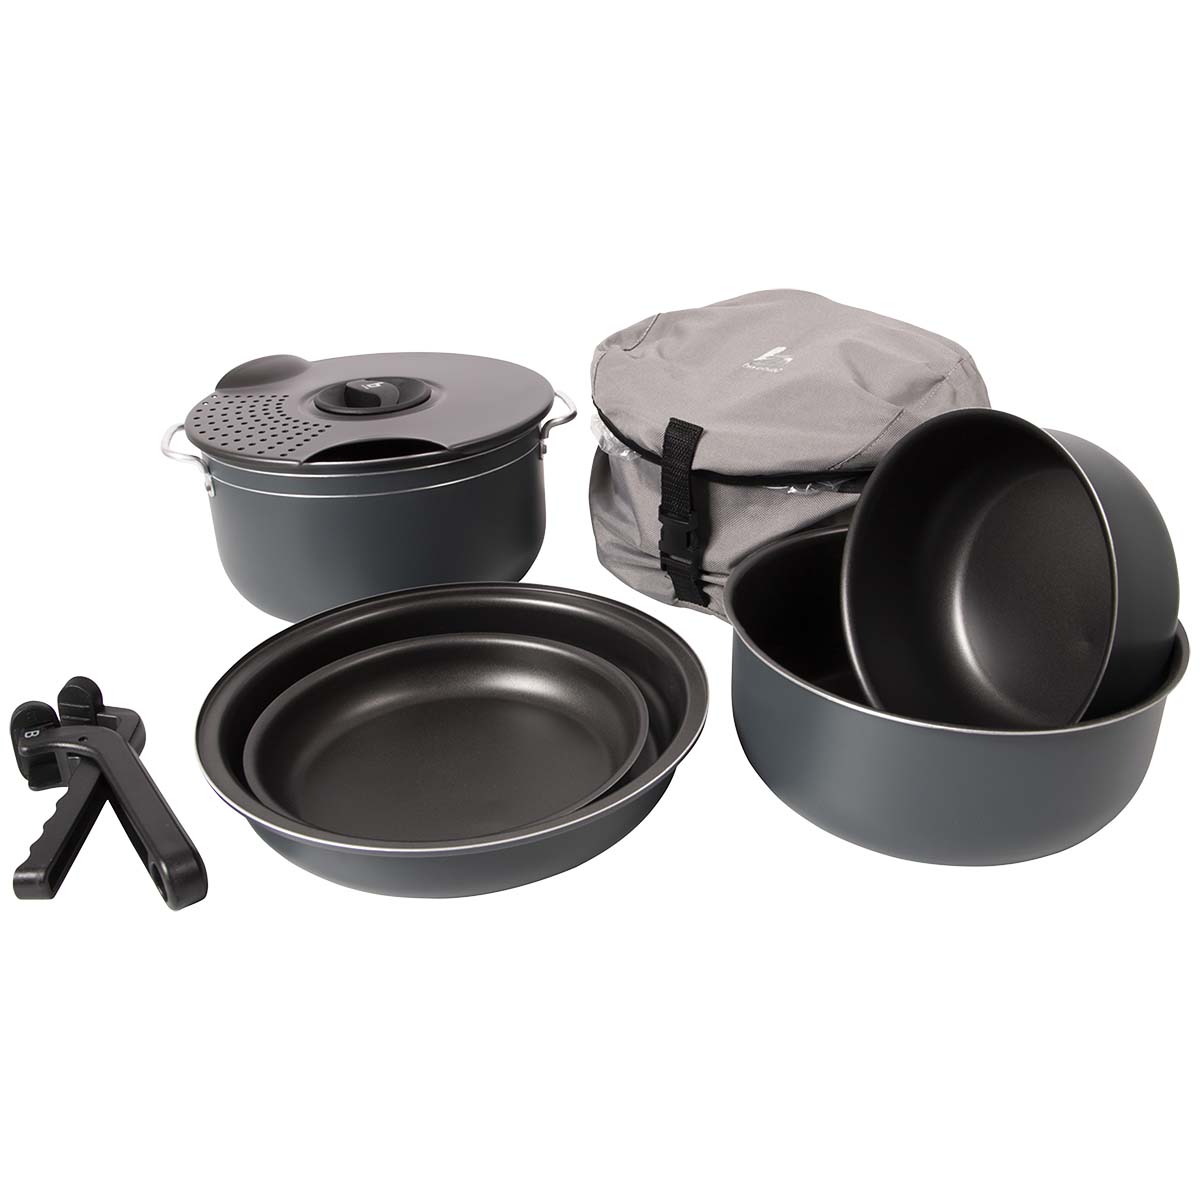 2300350 A complete and extremely compact 7 part cookware set. All pans from this set have a powder coating outside and a non-stick coating on the inside. By using aluminium this cooking set is extremely lightweight. These aluminium pans can be used on gas, ceramic and electrical heat sources. This pan set consists of 3 sauce pans, 2 frying pans, a strainer lid and loose pan handle. The supplied protective cover ensures that the full set can be stored compact. Dimensions of cooking pans (Øxh): 23x12, 21x8 and 17x7 cm. Dimensions of frying pans (Øxh): 24x4.5 and 18.5x3 cm. Dimensions nested (Øxh): 24x16 cm. Contents: 1,4, 2,5 and 4.4 litres.